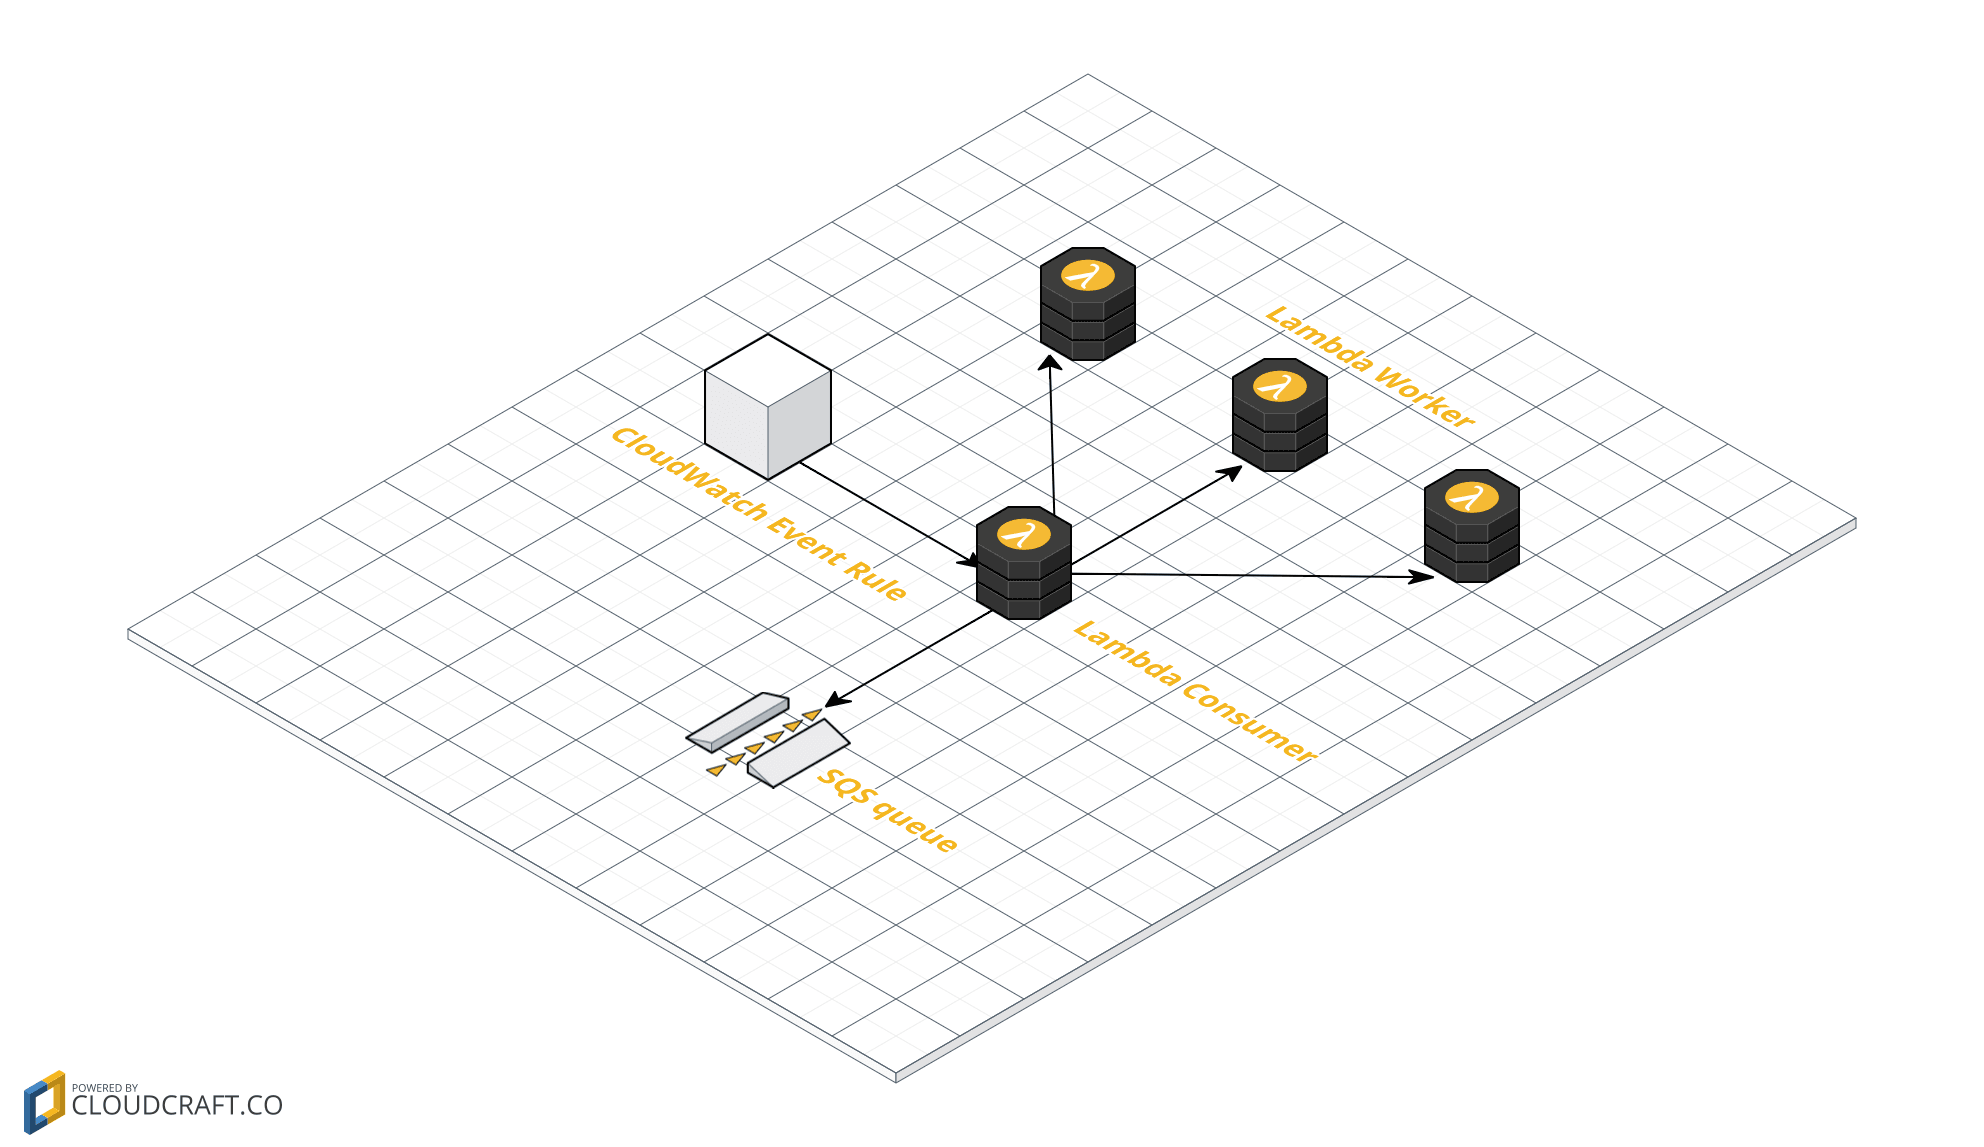 Integrate SQS and Lambda: serverless architecture for asynchronous workloads